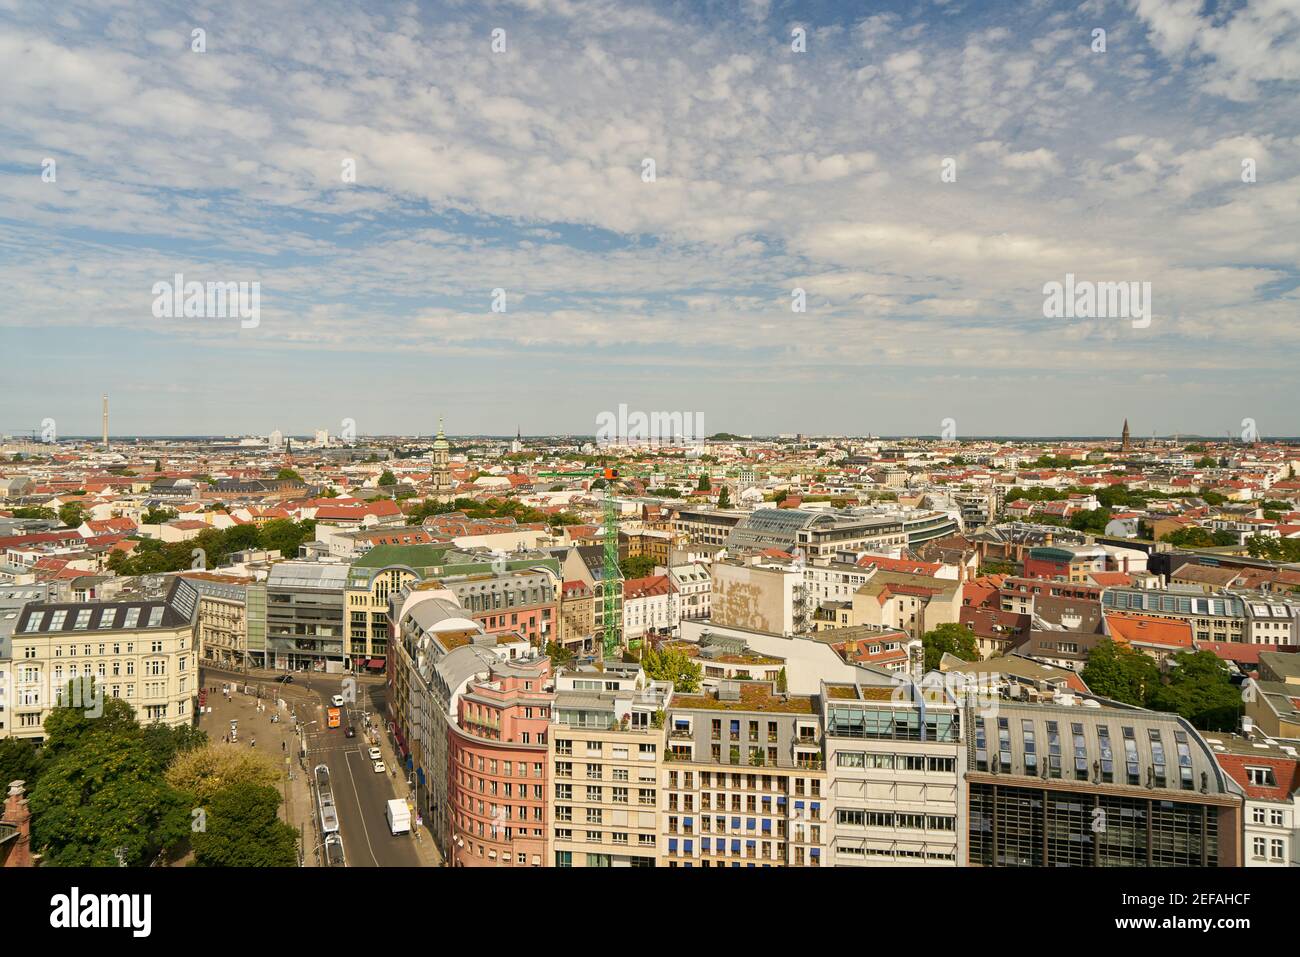 Cityscape of Berlin with Hackescher Markt and many houses and roofs Stock Photo